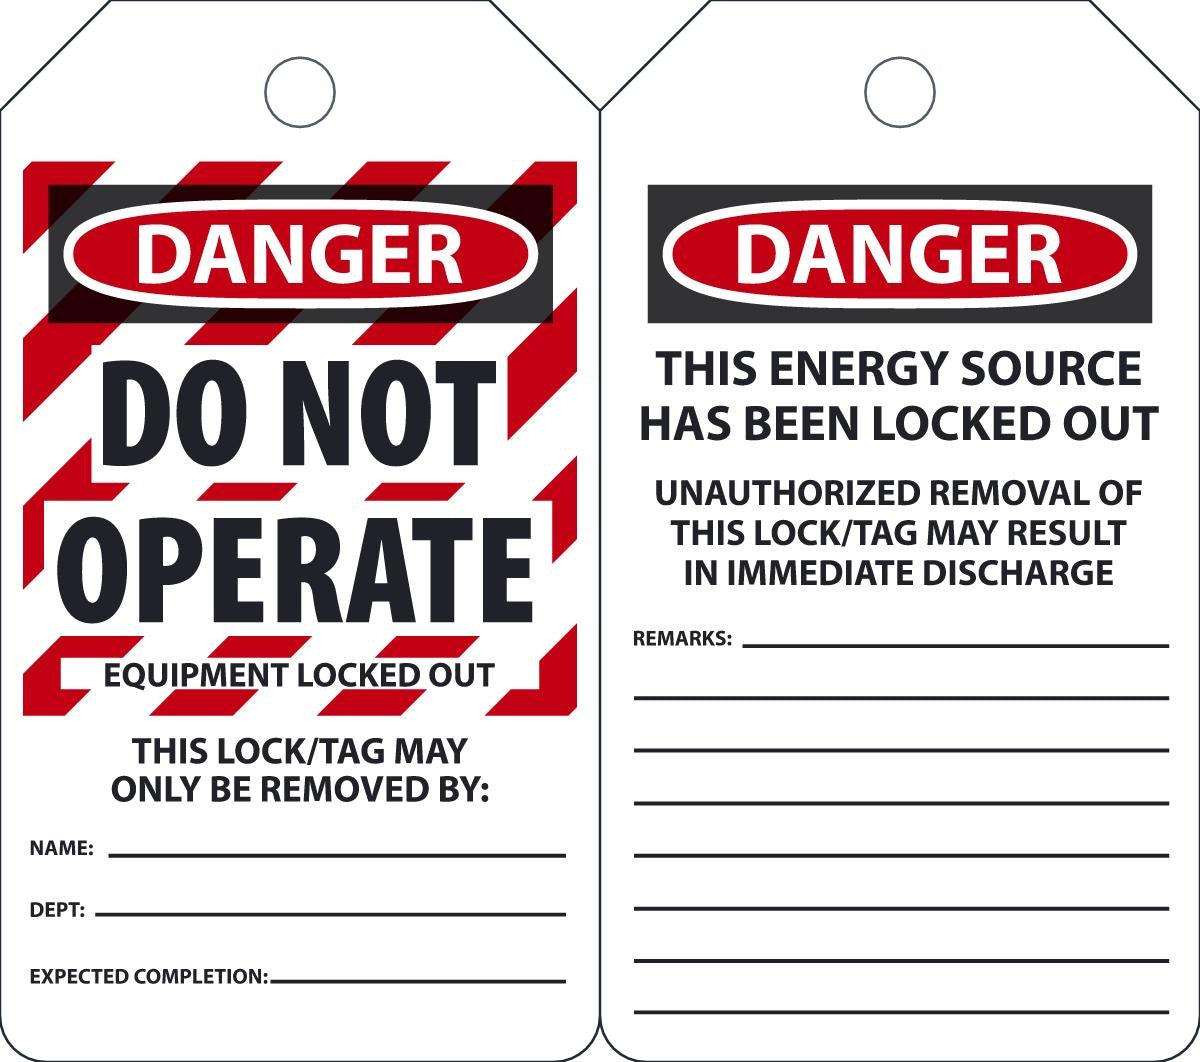 5 3/4" X 3 1/4" Red, Black And White 10 mil PF-Cardstock English Two Sided Lockout/Tagout Safety Tag "DANGER DO NOT OPERATE EQUIPMENT LOCKED OUT THIS LOCK/TAG MAY ONLY BE